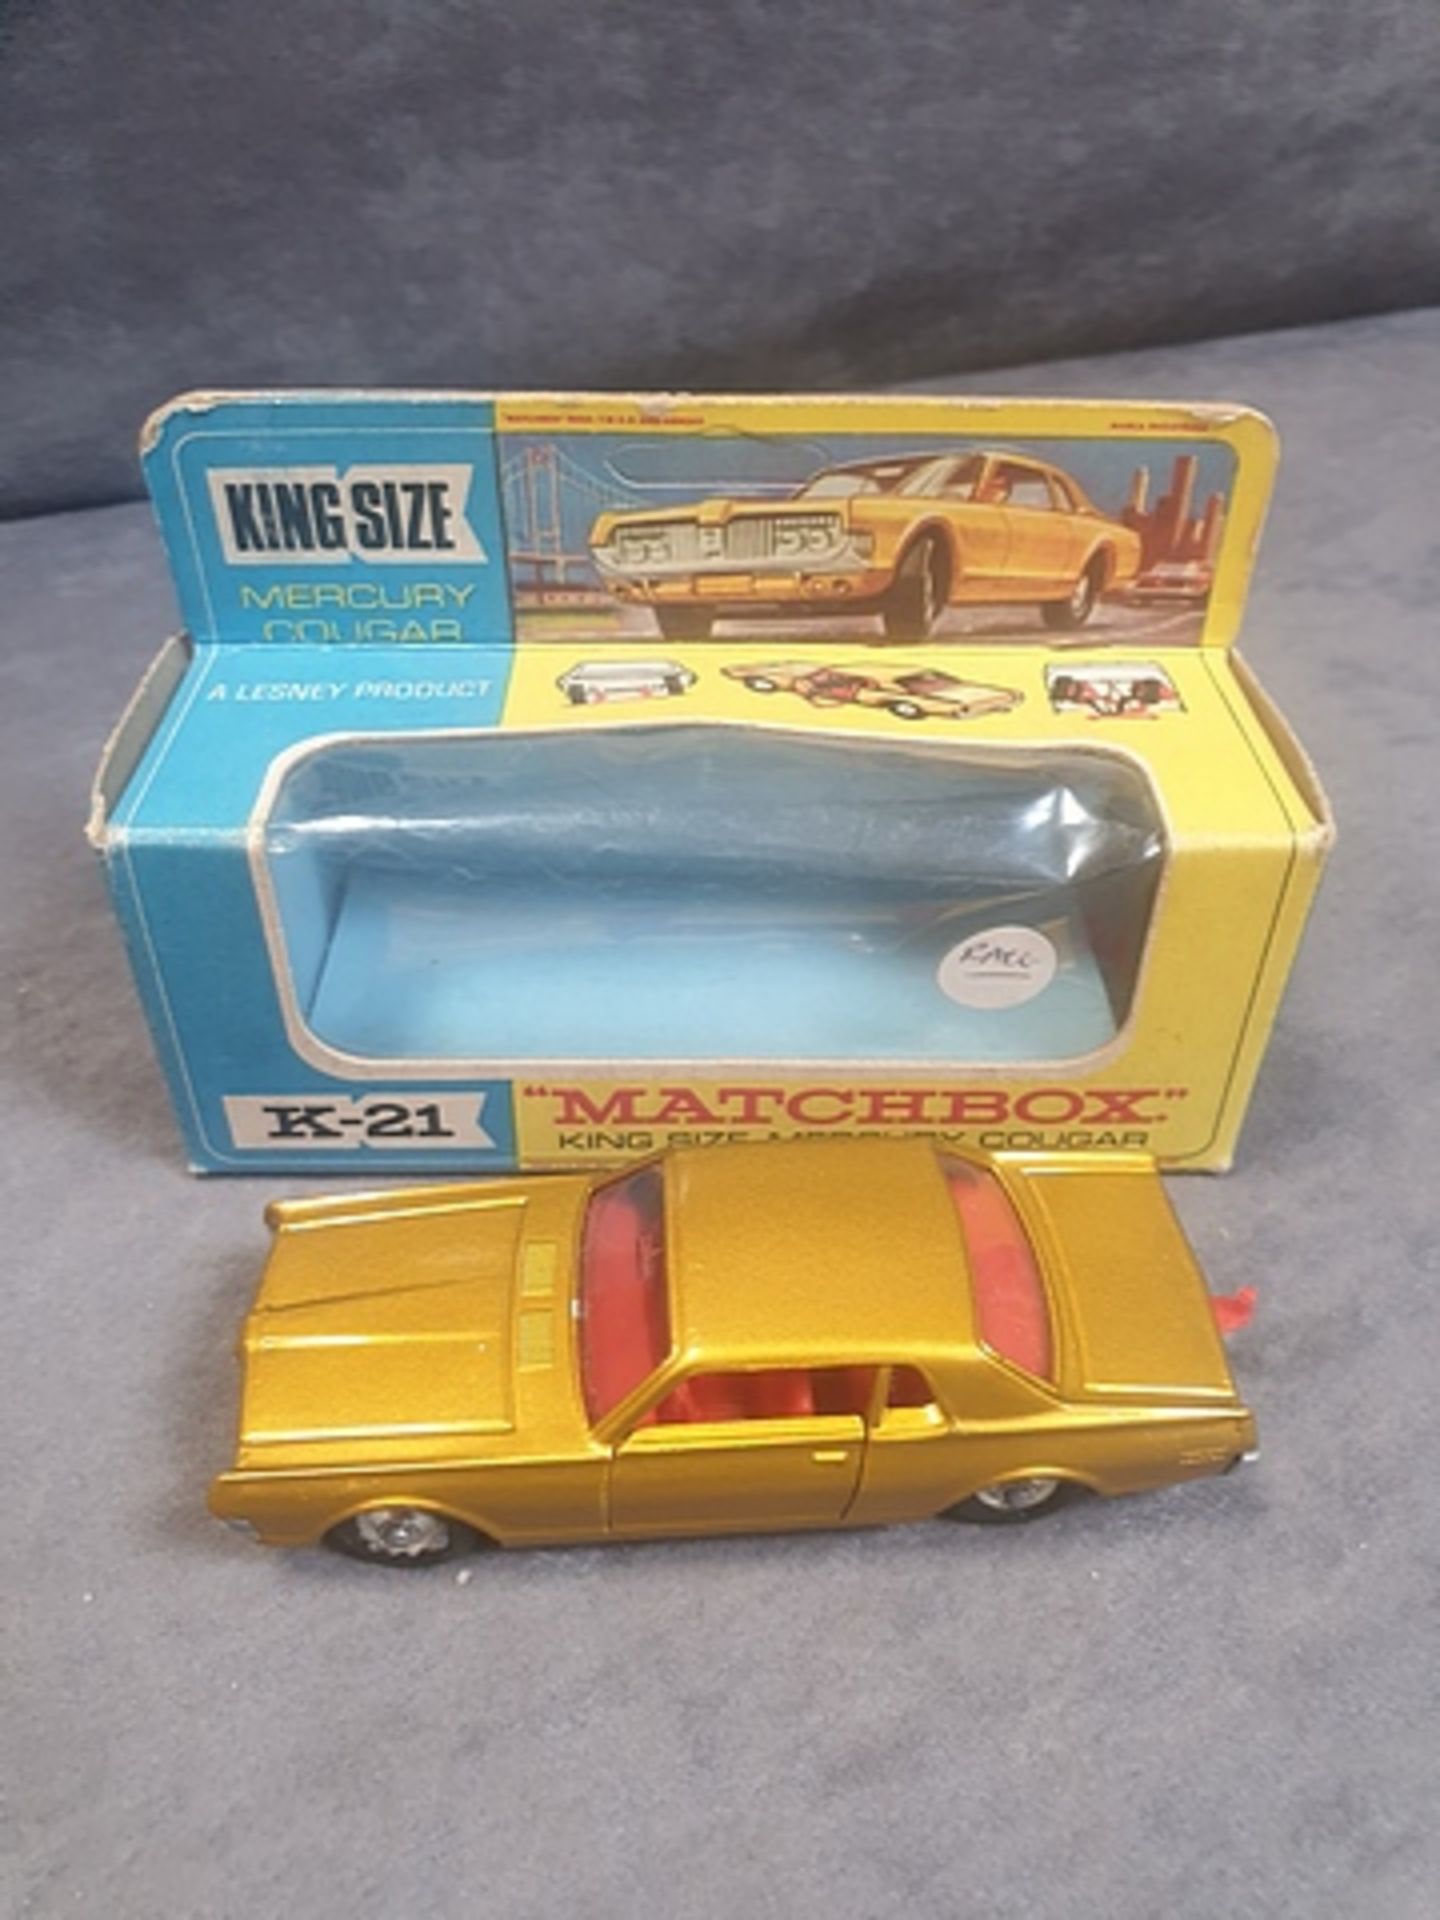 Matchbox Lesney #K-21 King Size Mercury Cougar Model is in Mint condition in mint box